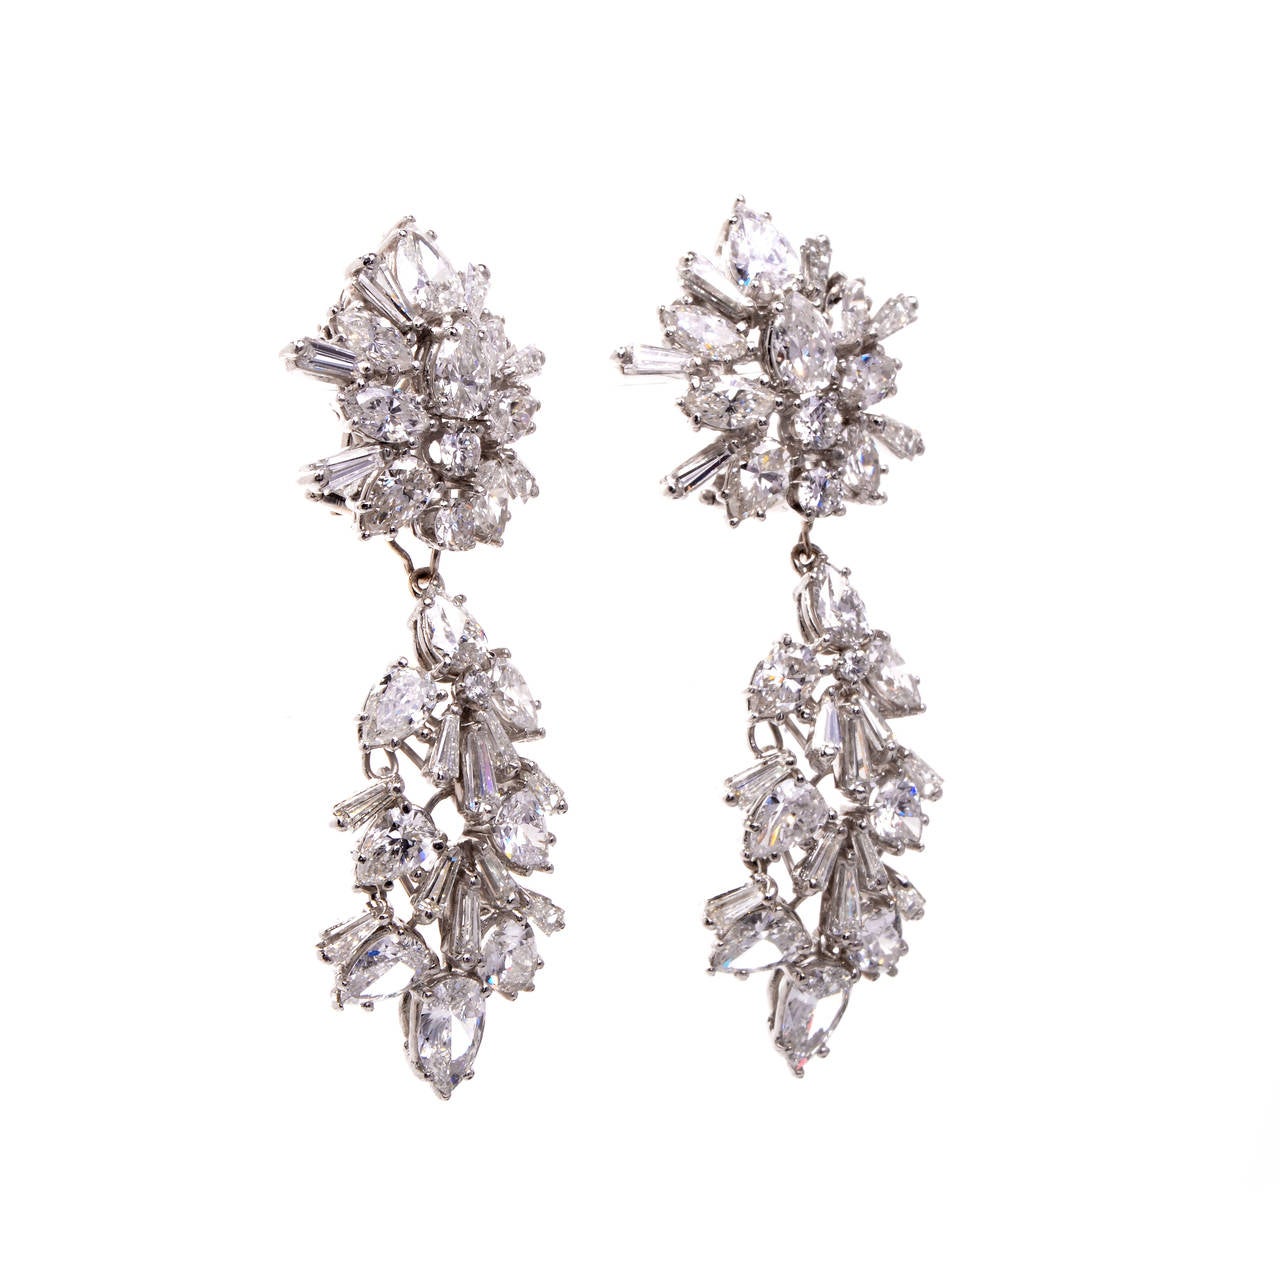 These antique circa 1960s earrings are a stunning combination of true magnificence, brilliance and pure luxury. These earrings are sure to be a breath-taking gift for your special someone or yourself, adding an unsurpassed opulence and shine to any